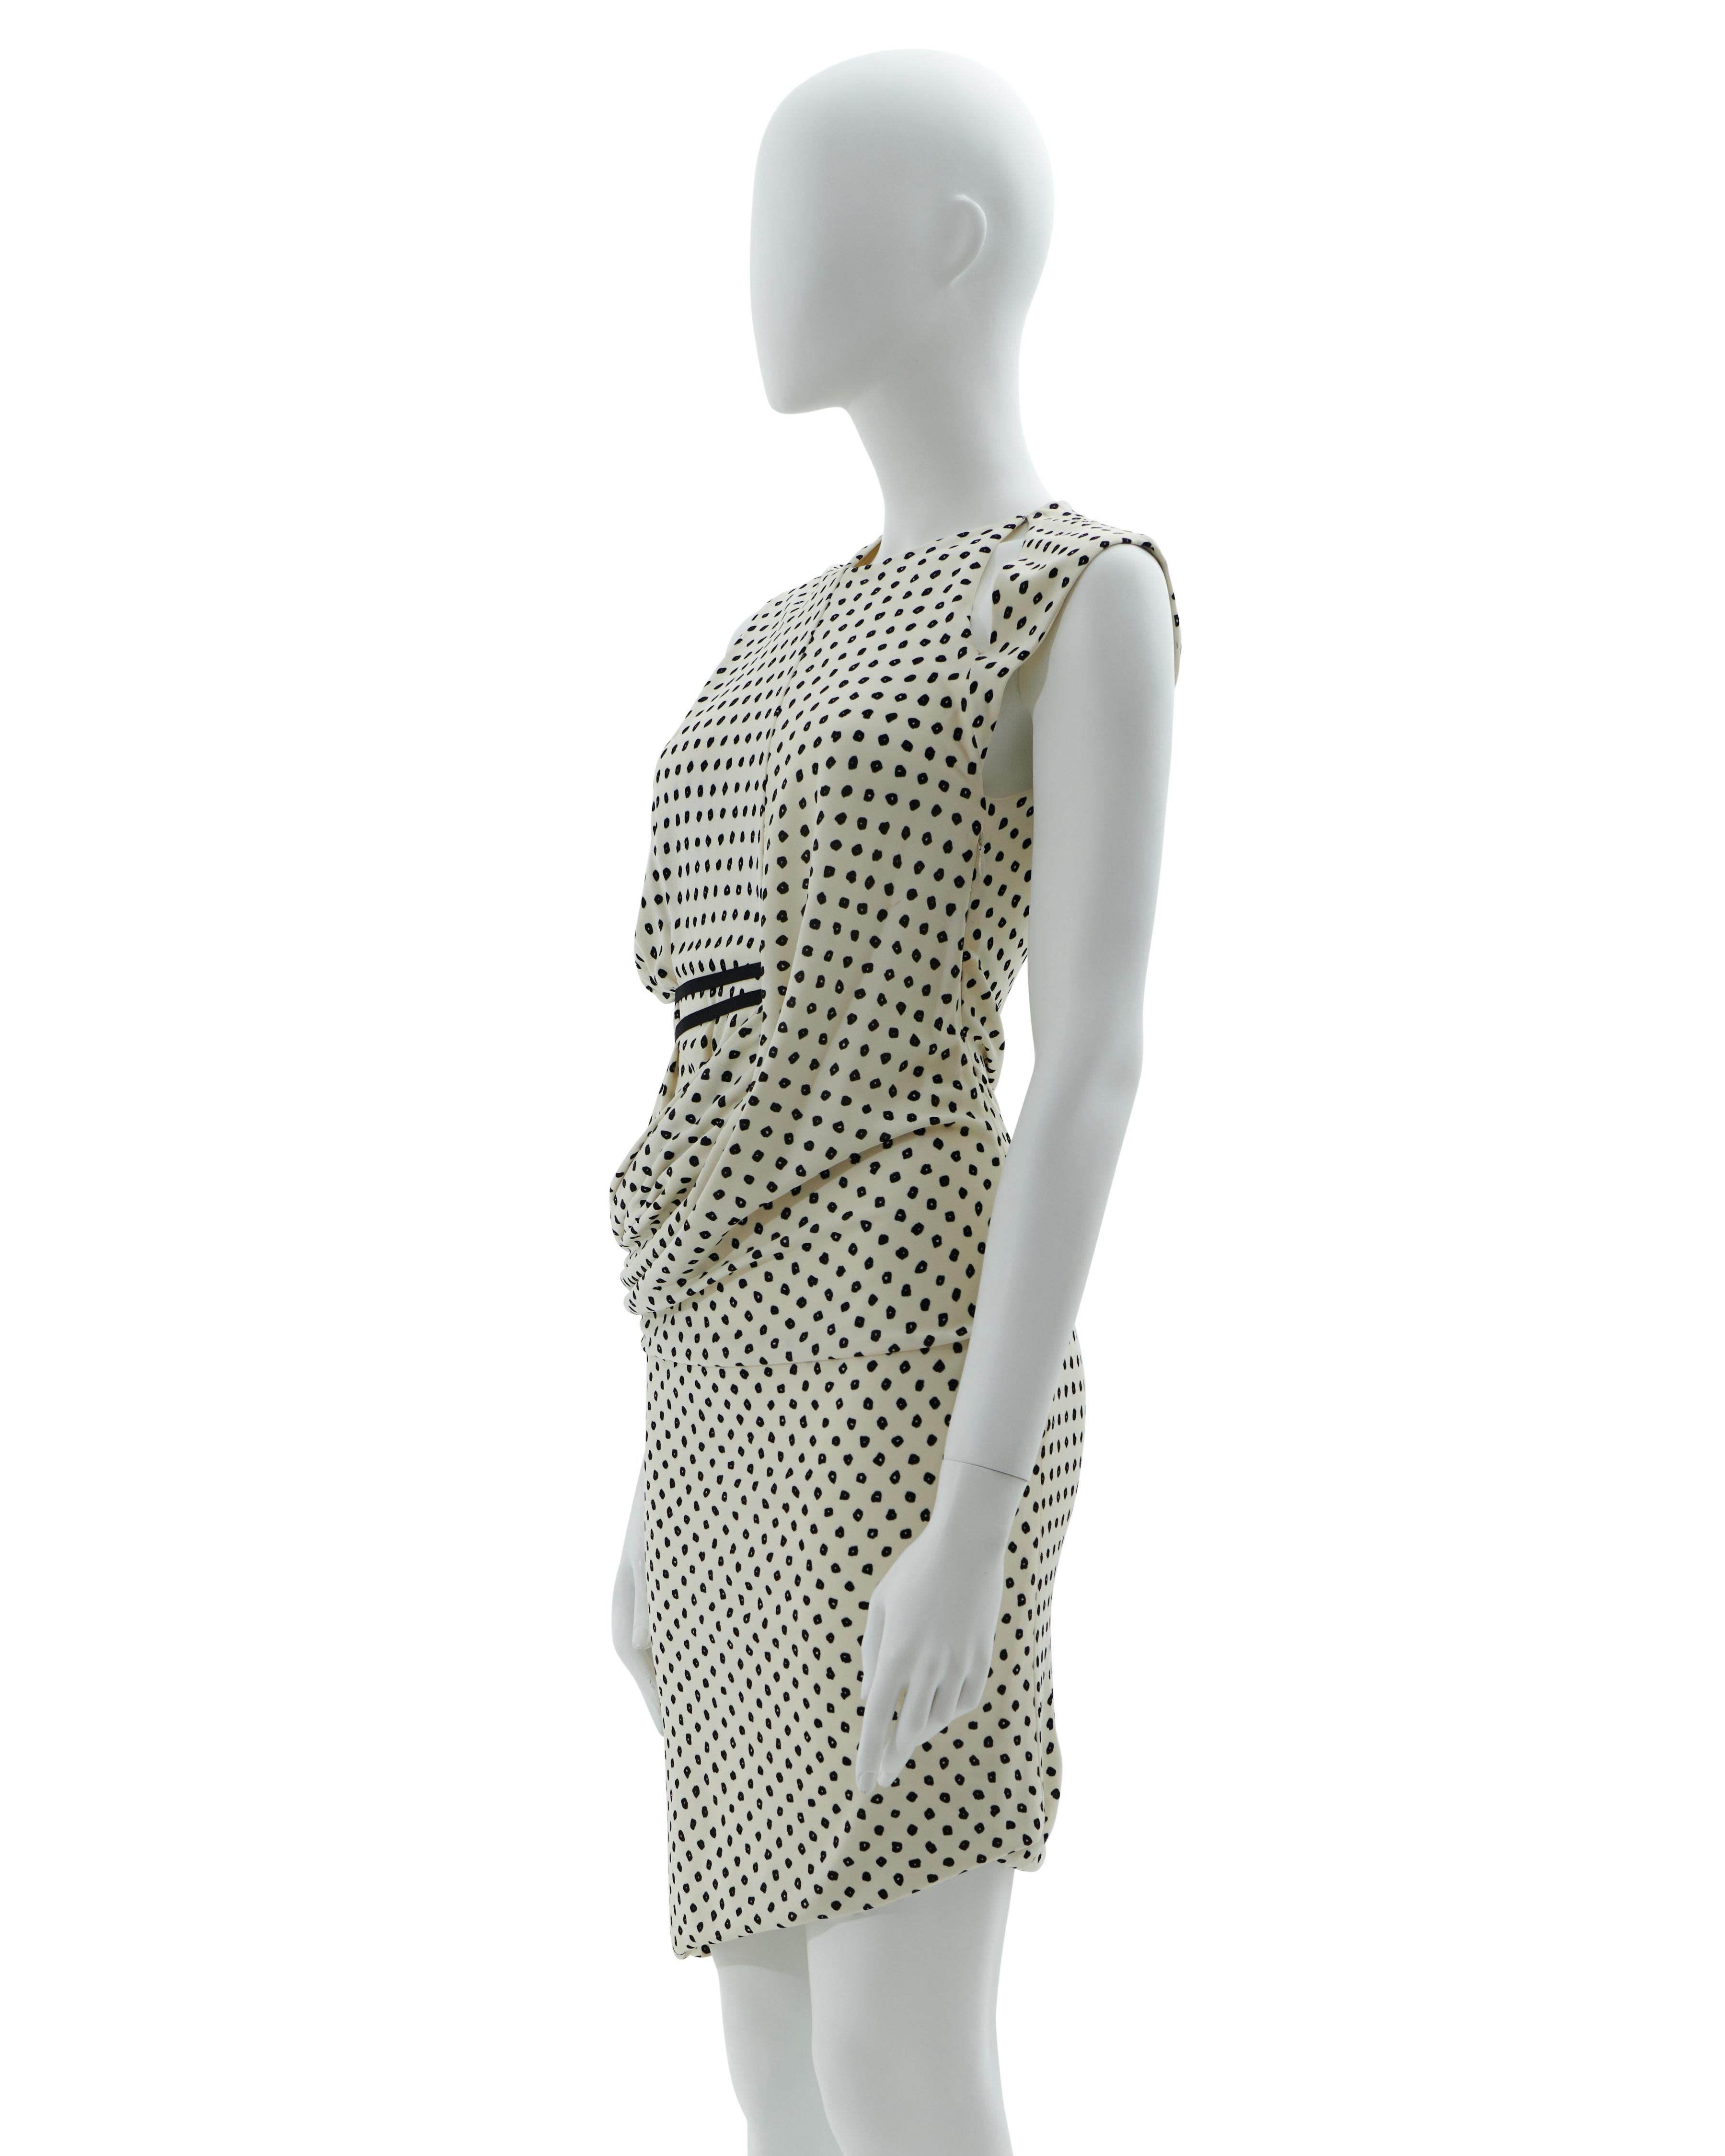 - Resort 2009 
- Sold by Skof.Archive 
- Designed by Ghesquière 
- Black and white all over printed asymmetric cocktail dress
- Sleveless
- Hidden side zipper closure 
- Draped asymmetric detail 
- Made in France 

Conditions: Good 

Composition: